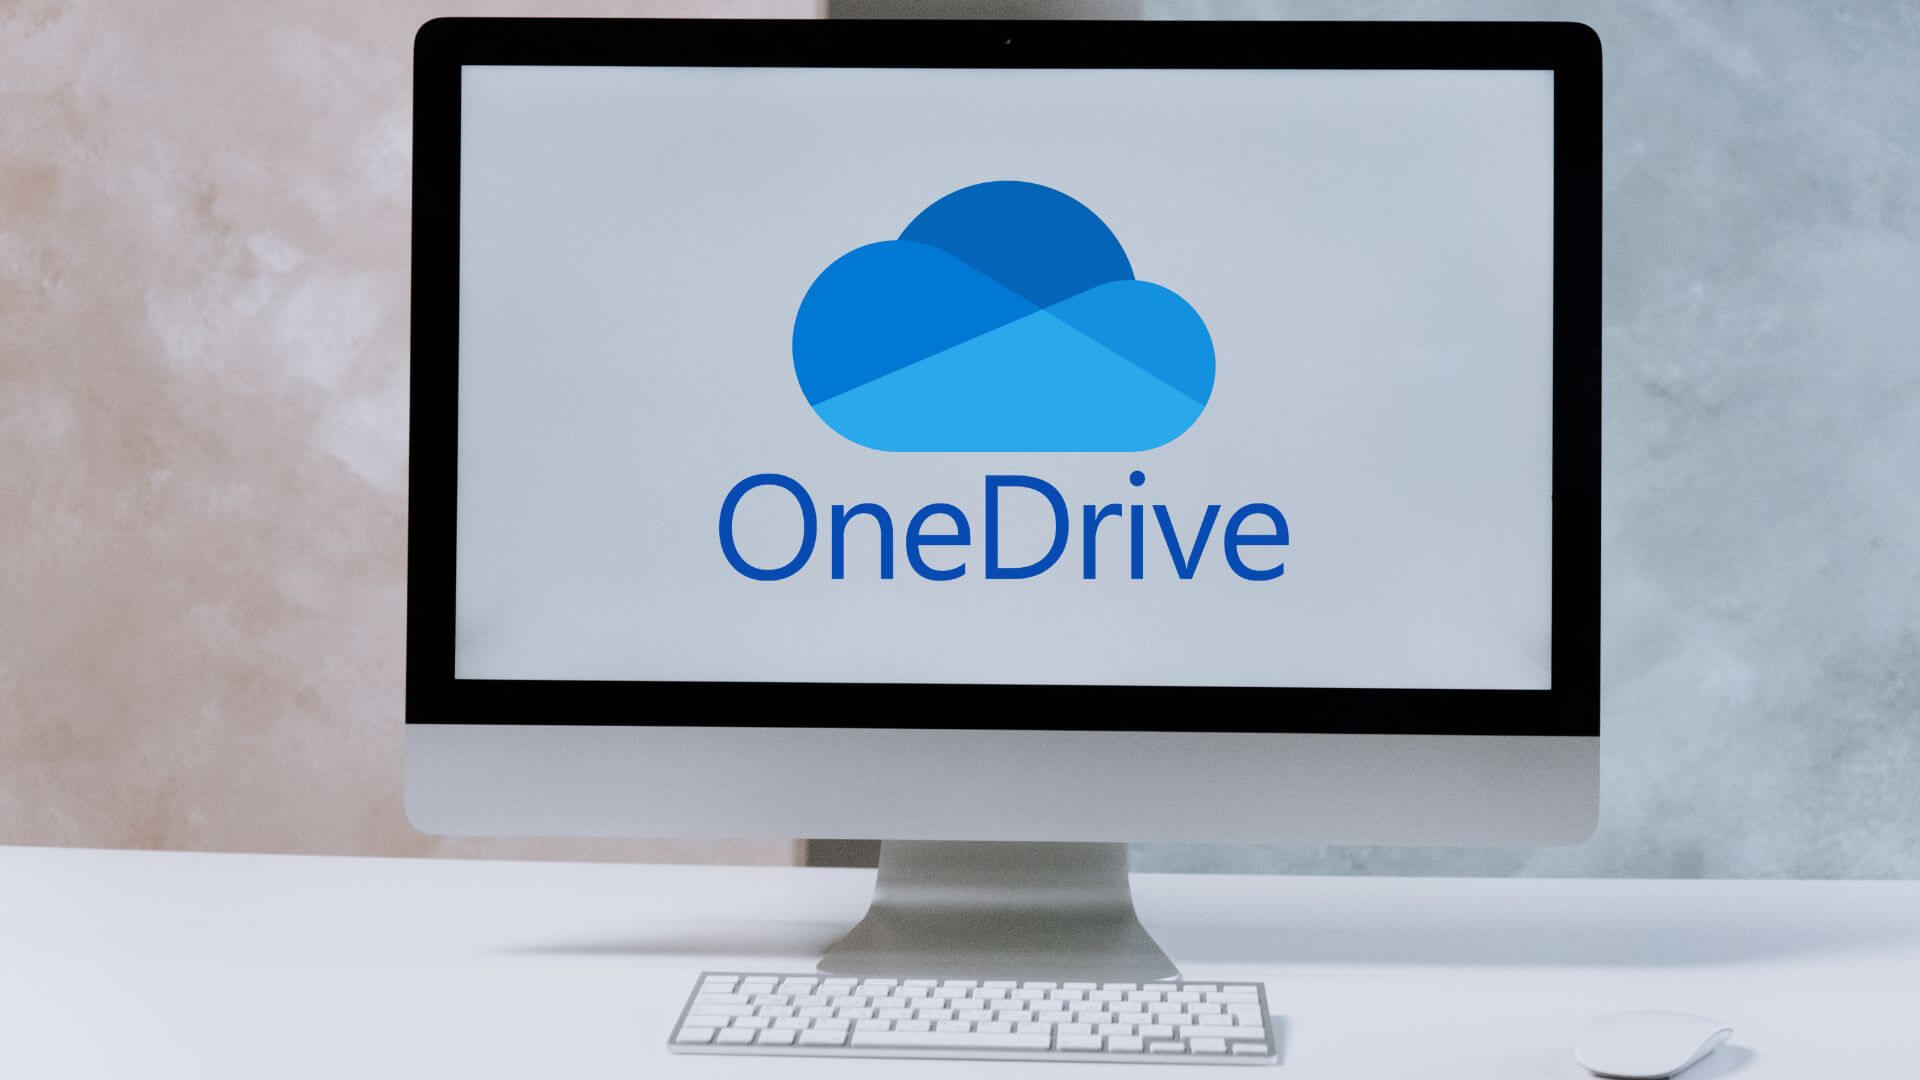 What is OneDrive and what is it for?